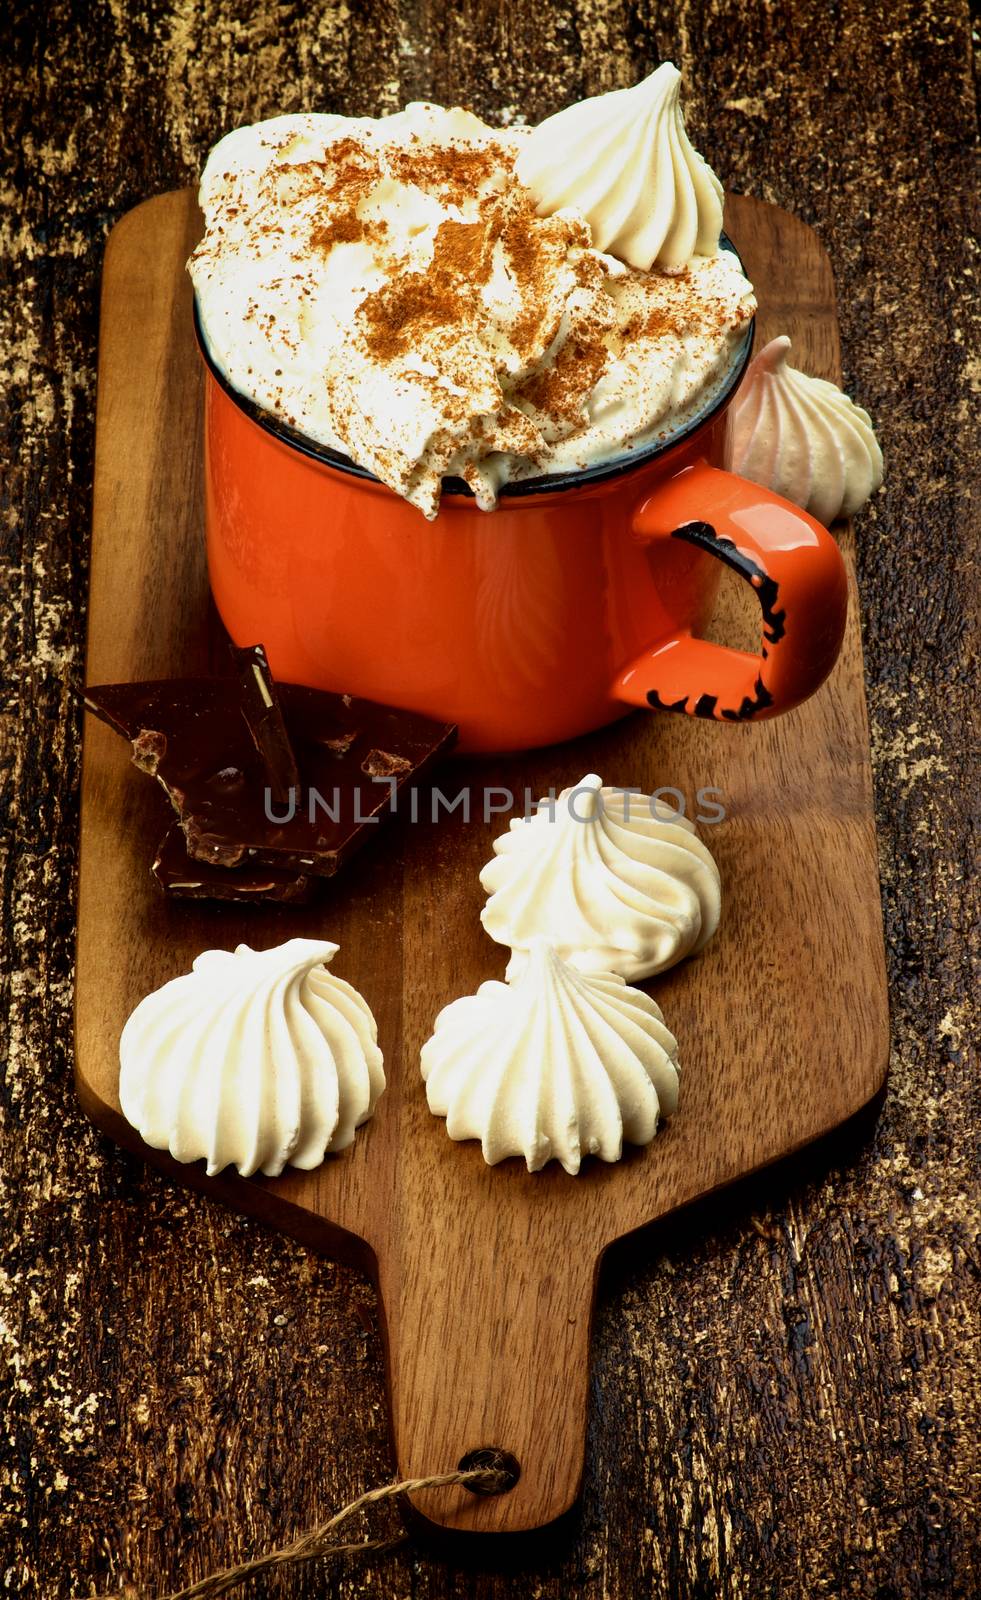 Arrangement of Hot Chocolate in Orange Cup Whipped Cream and Cinnamon, Meringues and Dark Chocolate on Cutting Board on Rustic Wooden background